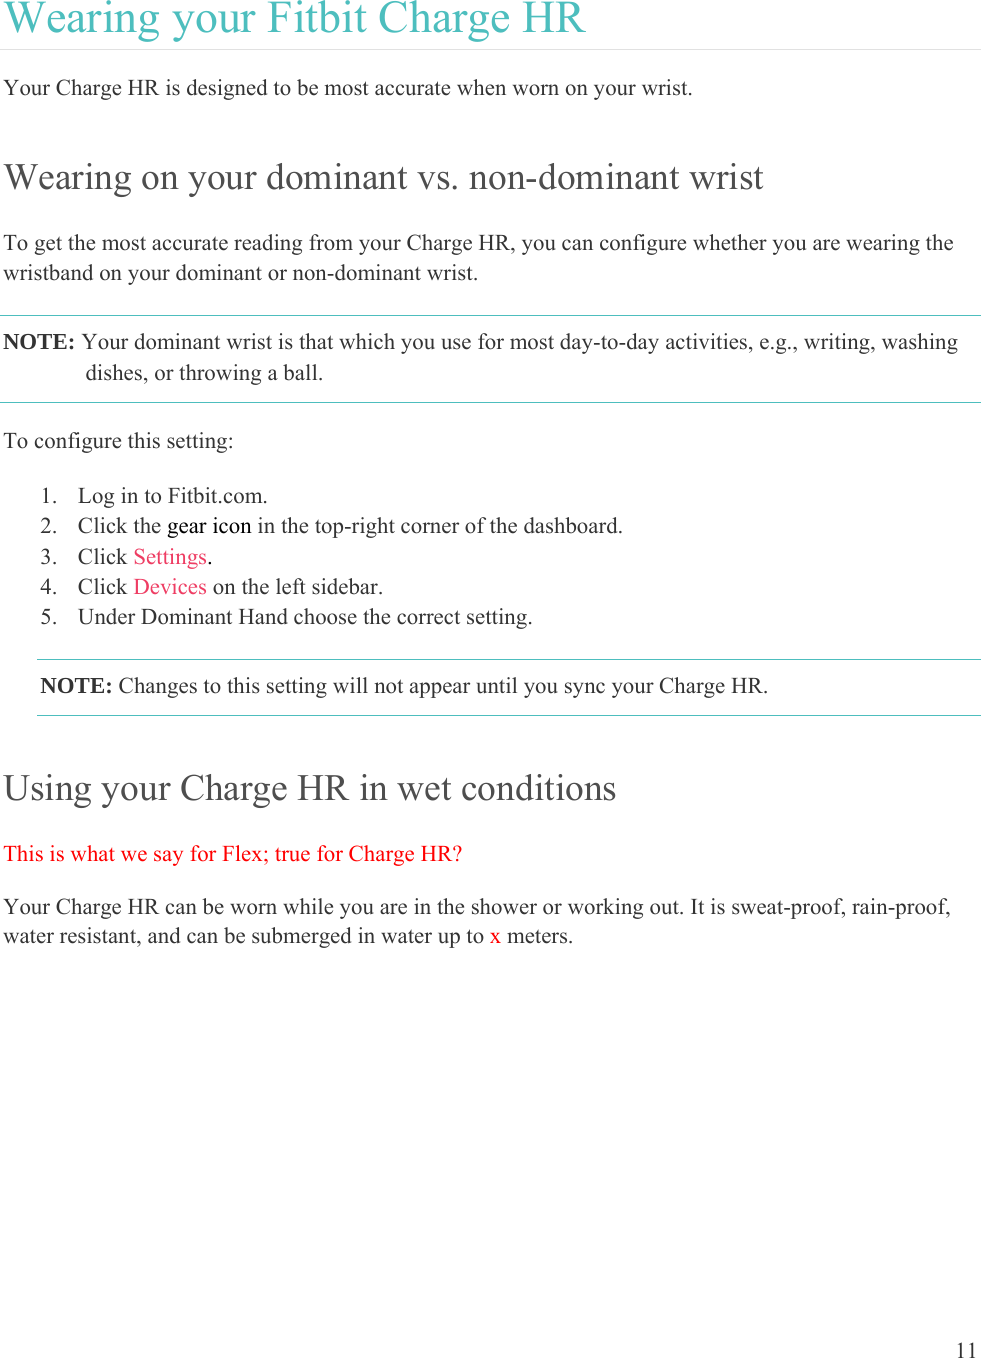 11  Wearing your Fitbit Charge HR Your Charge HR is designed to be most accurate when worn on your wrist.  Wearing on your dominant vs. non-dominant wrist To get the most accurate reading from your Charge HR, you can configure whether you are wearing the wristband on your dominant or non-dominant wrist. NOTE: Your dominant wrist is that which you use for most day-to-day activities, e.g., writing, washing dishes, or throwing a ball. To configure this setting:  1. Log in to Fitbit.com. 2. Click the gear icon in the top-right corner of the dashboard. 3. Click Settings. 4. Click Devices on the left sidebar. 5. Under Dominant Hand choose the correct setting. NOTE: Changes to this setting will not appear until you sync your Charge HR.  Using your Charge HR in wet conditions This is what we say for Flex; true for Charge HR? Your Charge HR can be worn while you are in the shower or working out. It is sweat-proof, rain-proof, water resistant, and can be submerged in water up to x meters.  